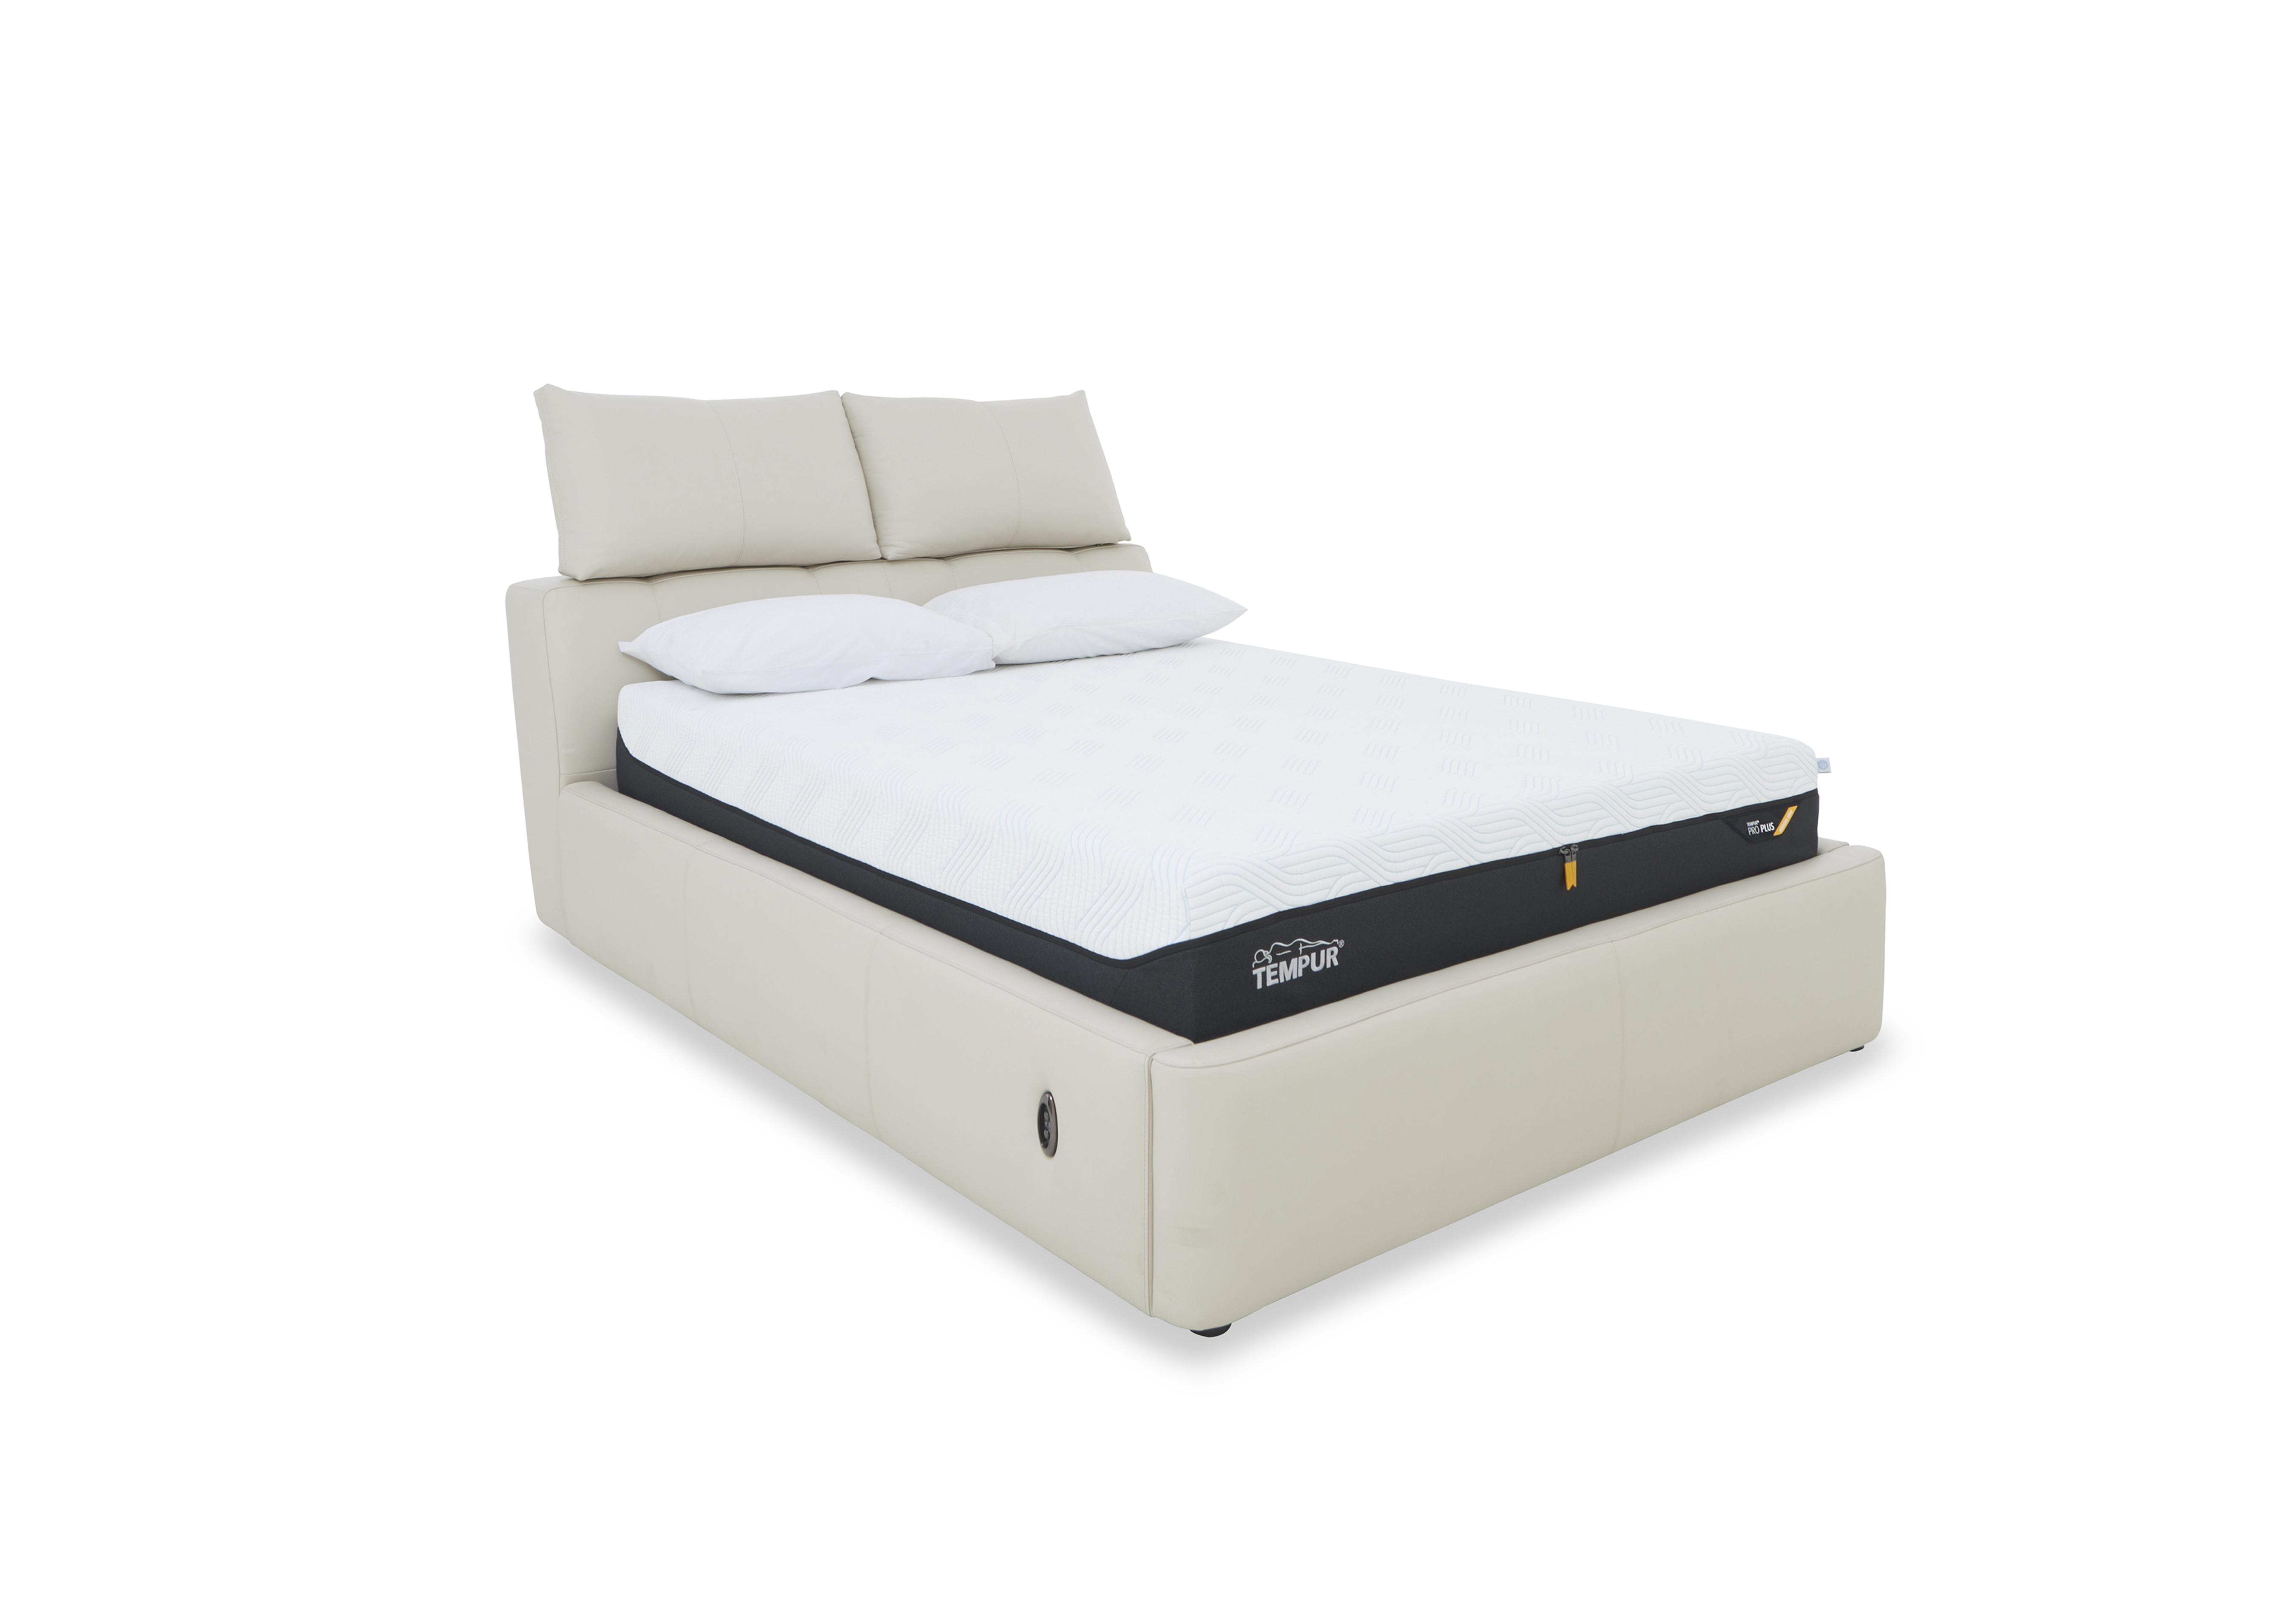 Tyrell Leather Electric Ottoman Bed Frame in Nw-521e Frost on Furniture Village